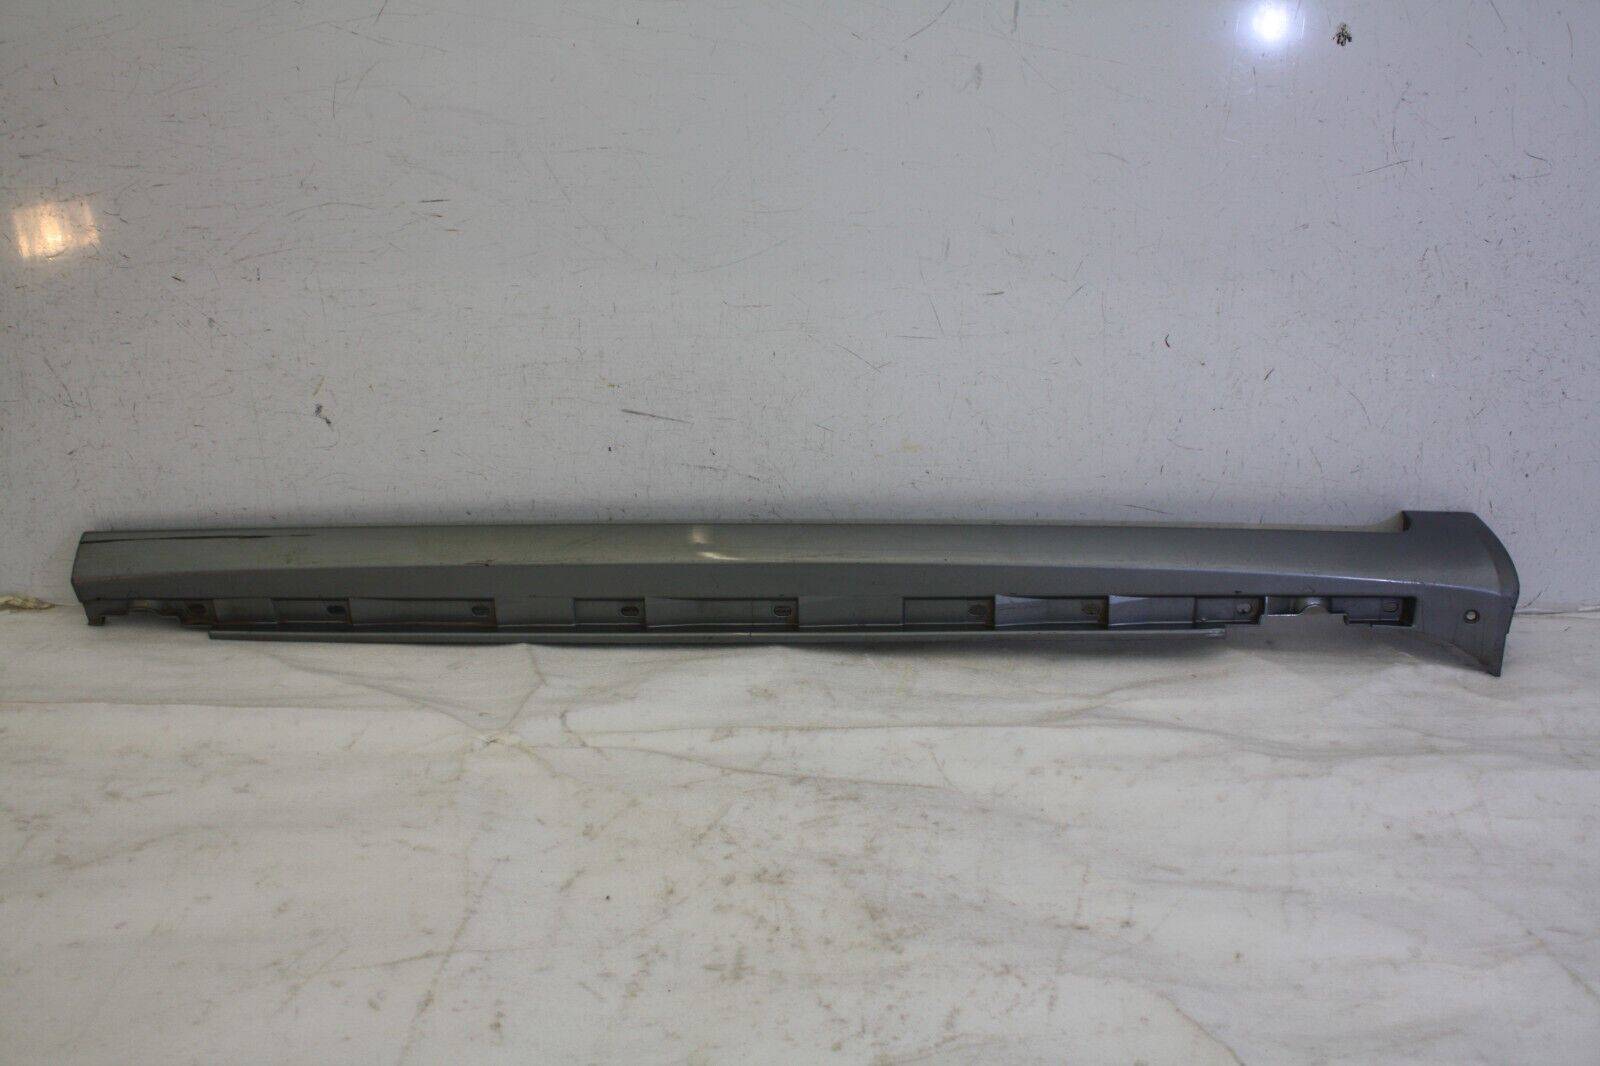 Audi A4 B7 Right Side Skirt 2005 TO 2008 8E0853860 Genuine 176217022024